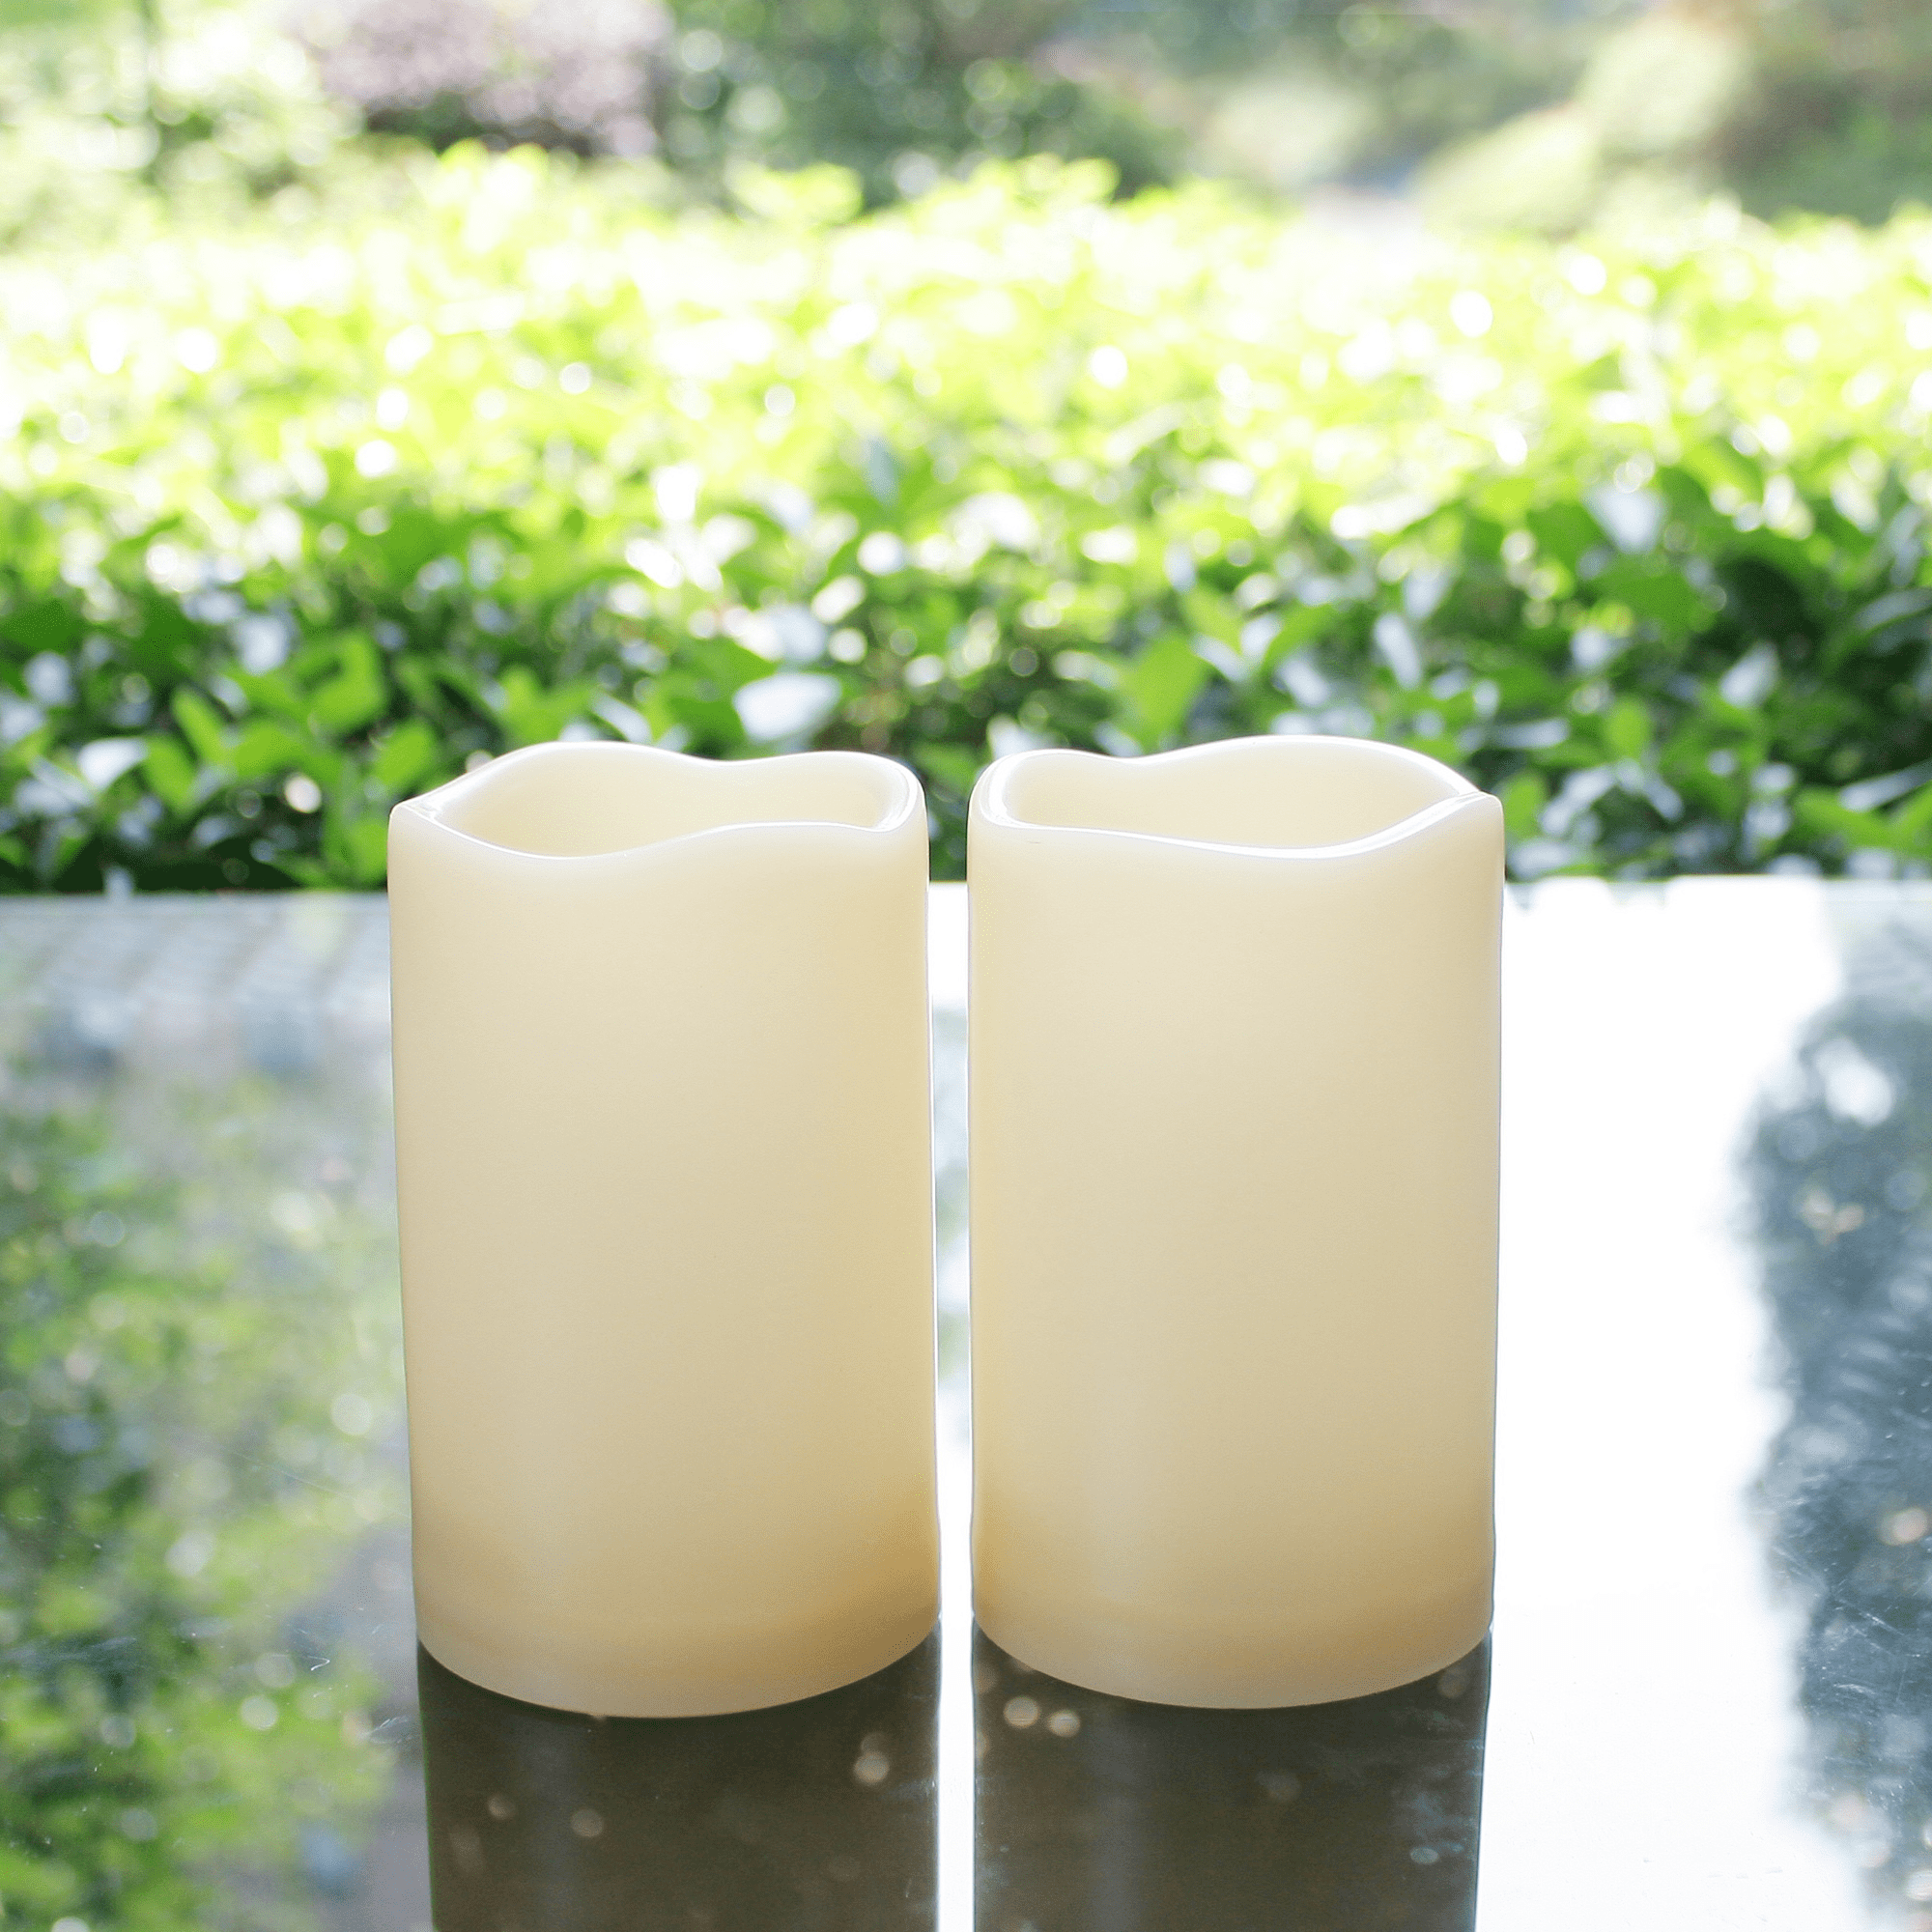 2x Flameless LED Candles Resin Pillar Candles w/ Timer for Wedding Party Decor 